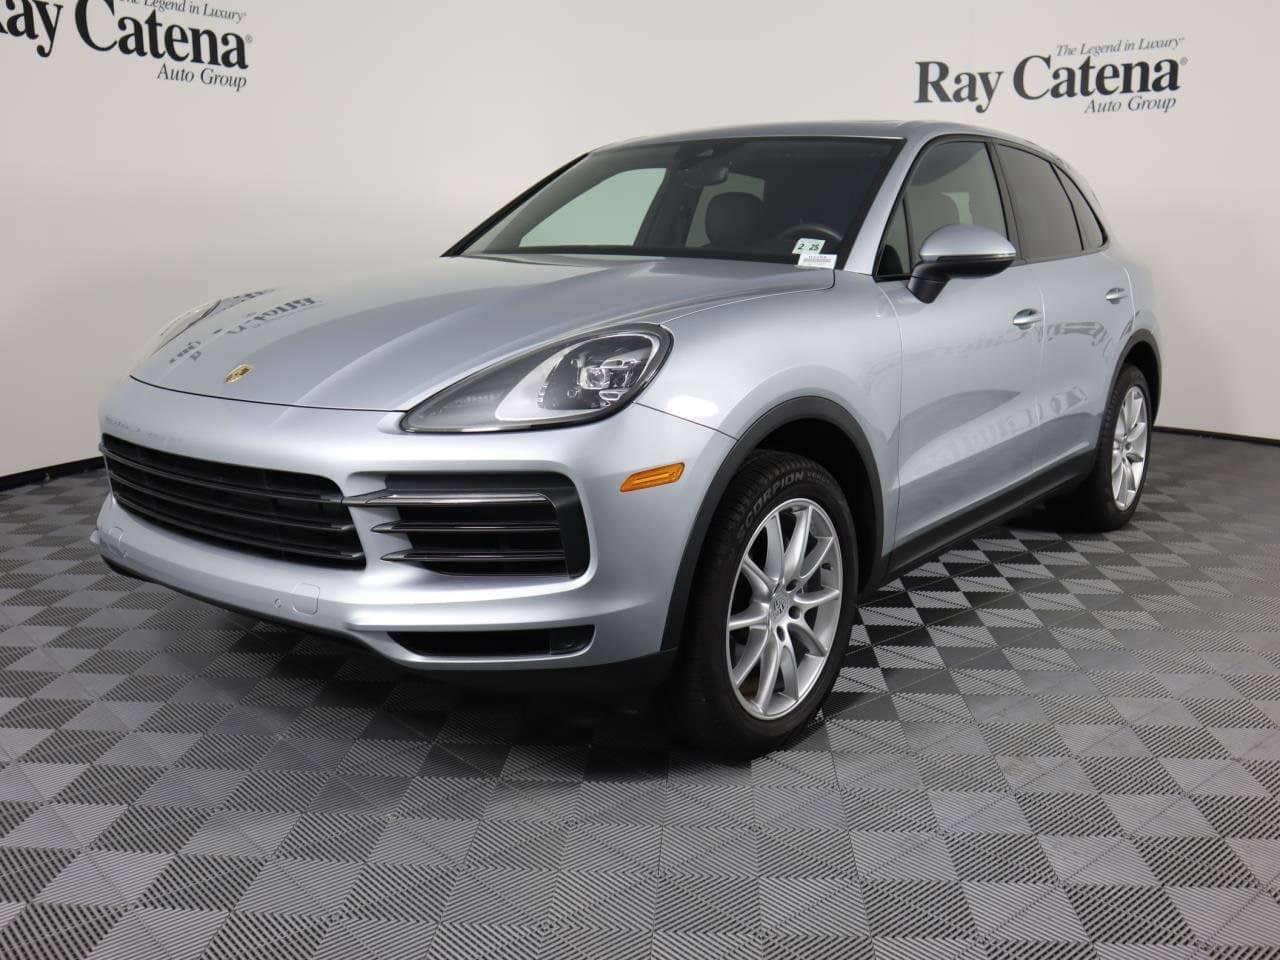 Certified Pre-Owned 2020 Porsche Cayenne SUV For Sale in Edison New Jersey